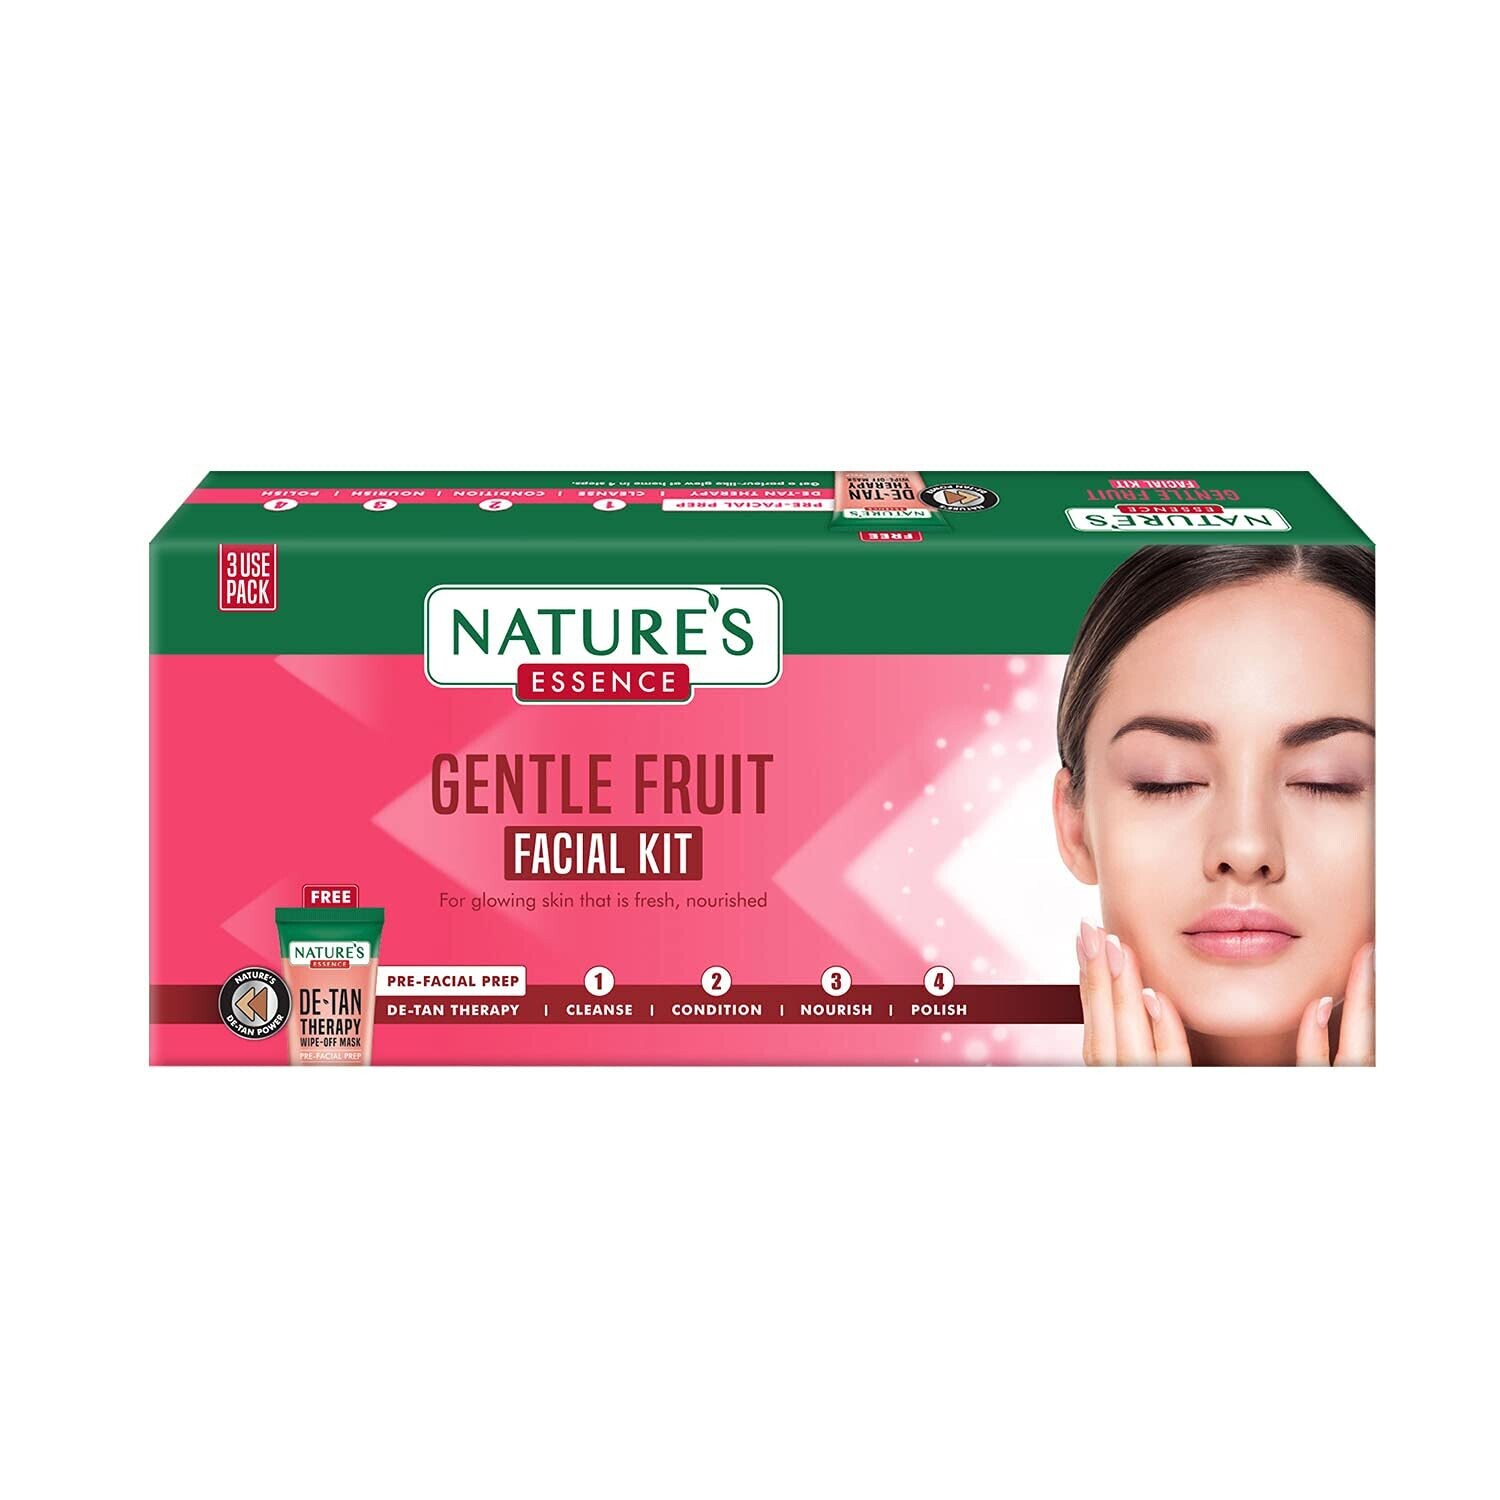 Nature's Essence Gentle Fruit Facial Kit 3 Use, White, 1 count, 60 gm